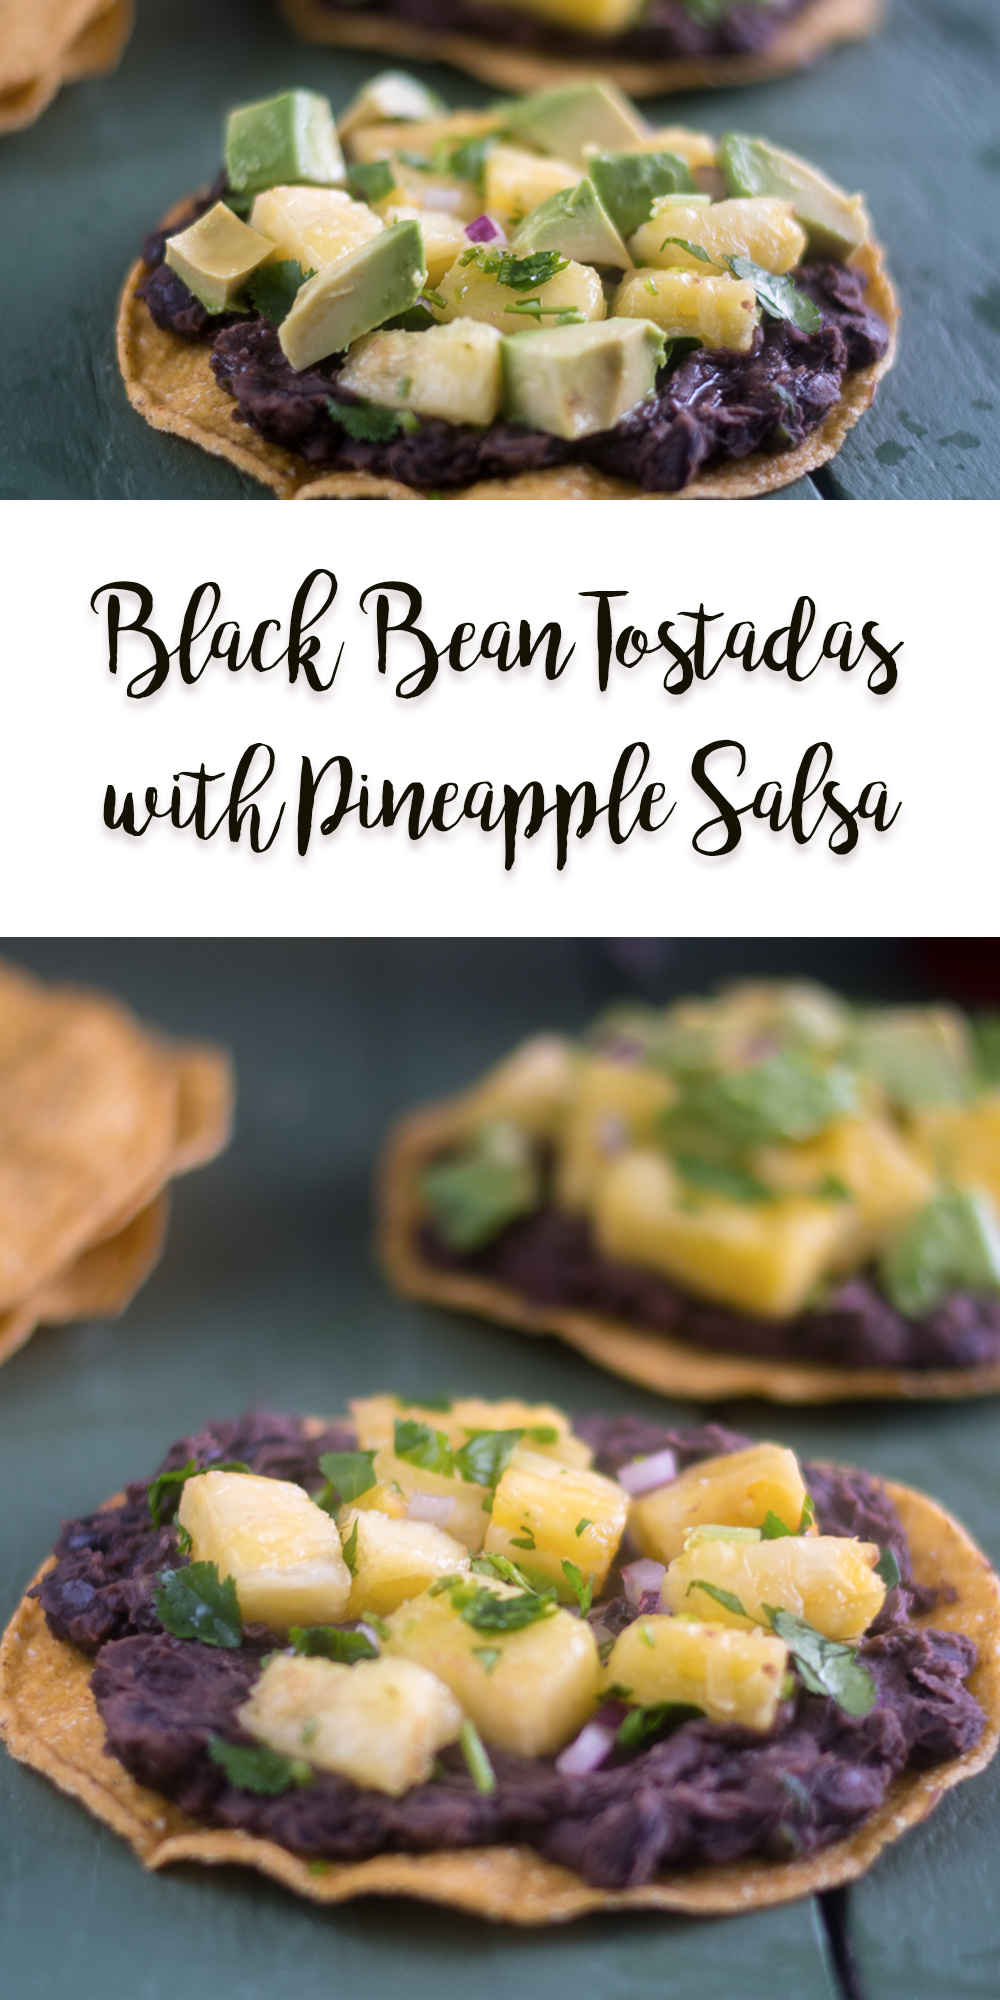 Corn tostadas topped with refried beans and pineapple salsa. A quick and easy meal! #vegan #recipe #easy #easyrecipe #Mexican #Vegan #Tostadas #beans #pineapple #salsa